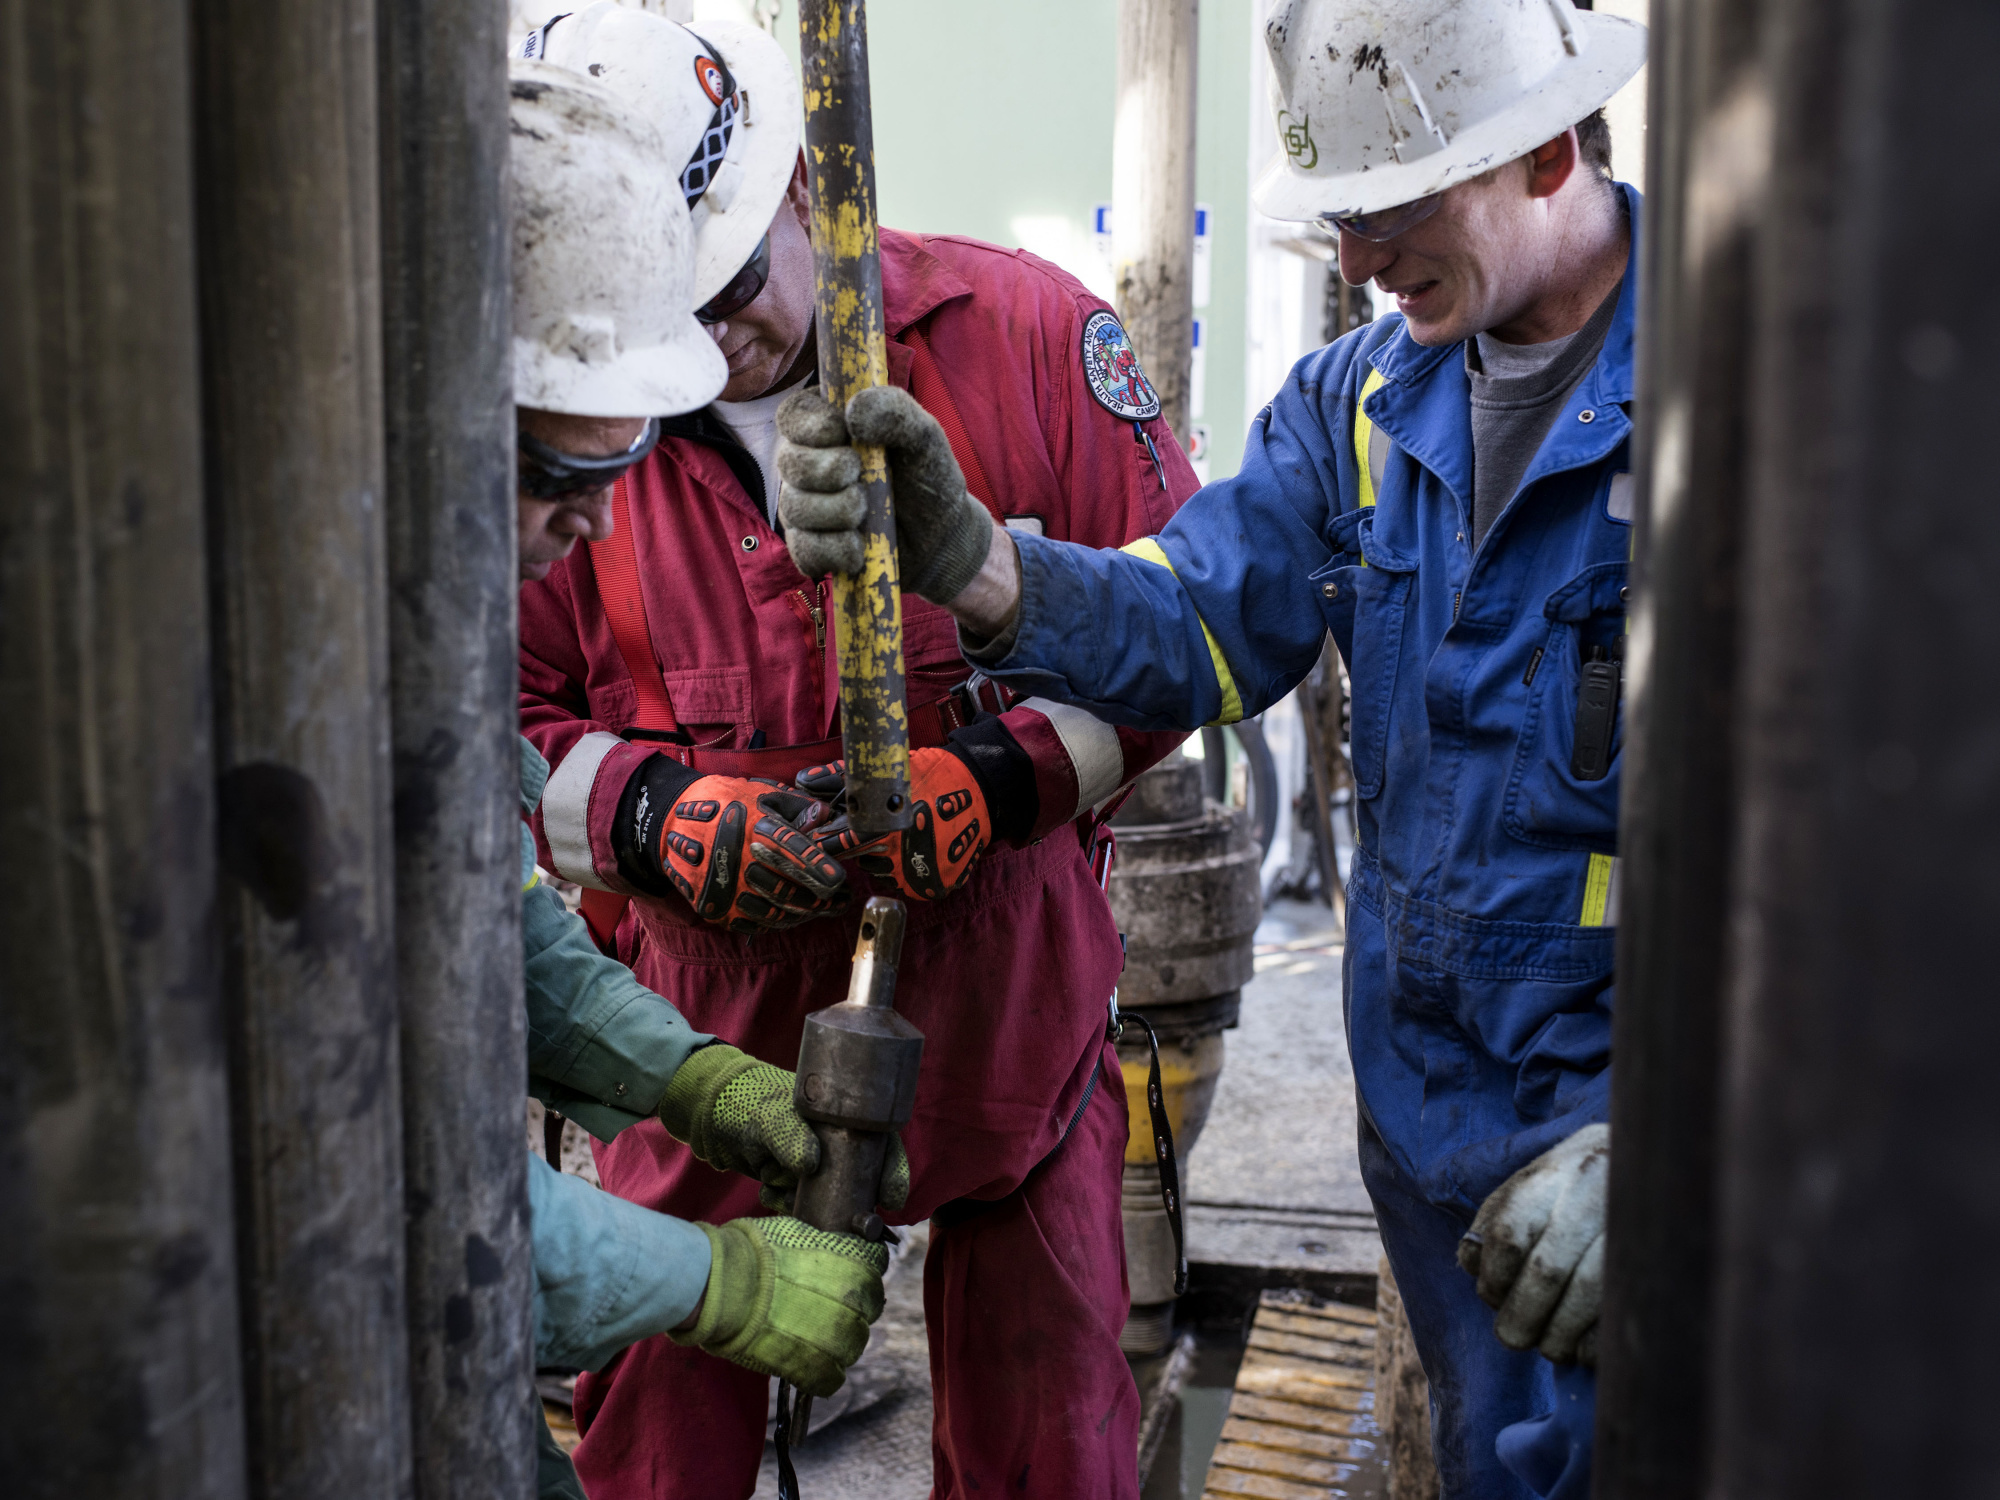 Precision Drilling oil rig operators install a bit guide on the floor of a Royal Dutch Shell Plc oil rig near Mentone, Texas, U.S., on Thursday, March 2, 2017. Photographer: Matthew Busch/Bloomberg